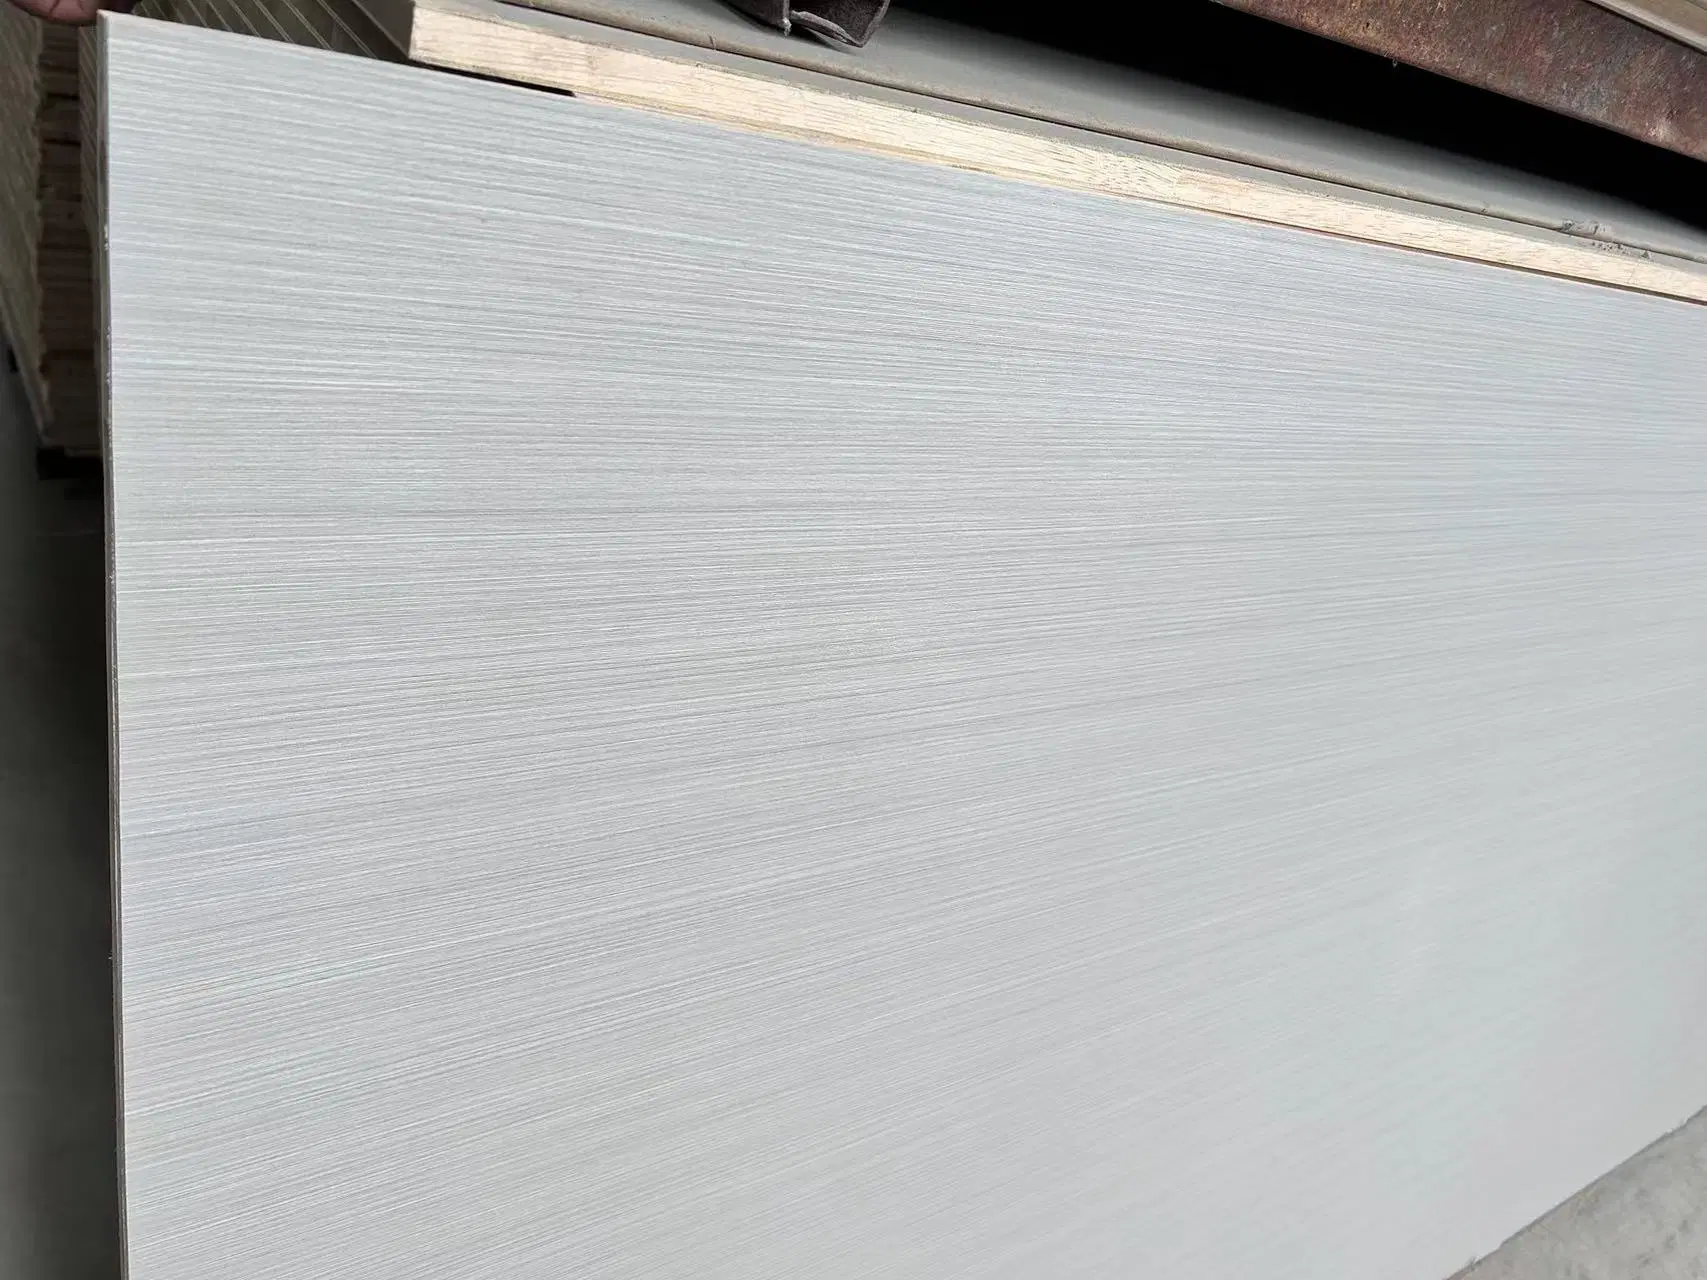 Low Price Melamine Board on Particle Board/Plywood/MDF Cheap Particle Board for Furniture